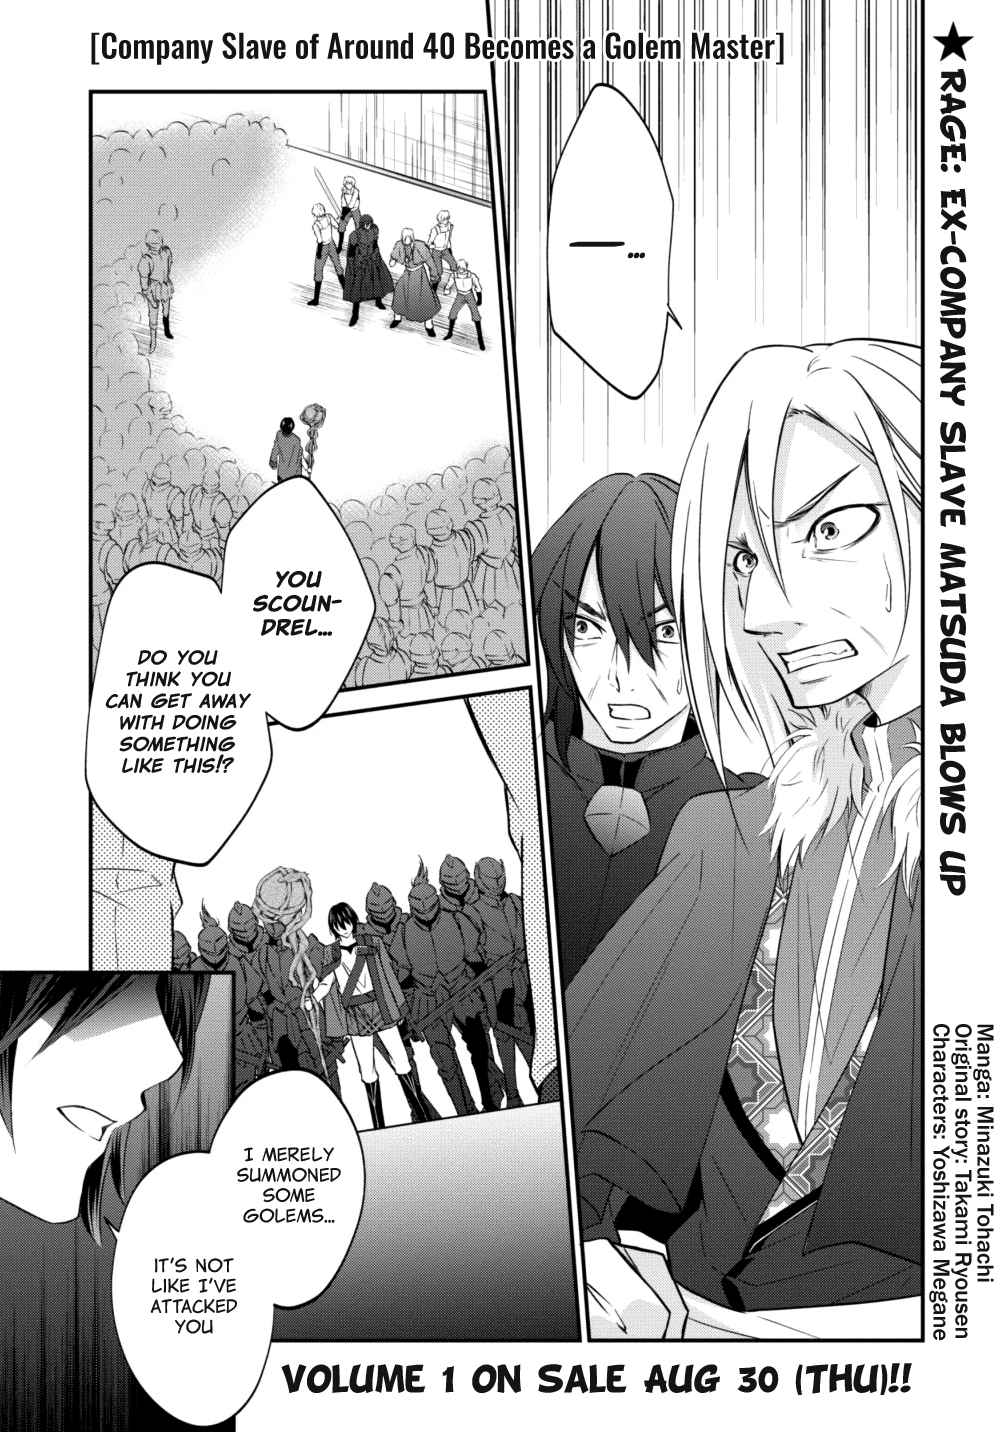 Arafoo Shachiku no Golem Master Ch. 6 There Are Company Slaves in Antoher World Too